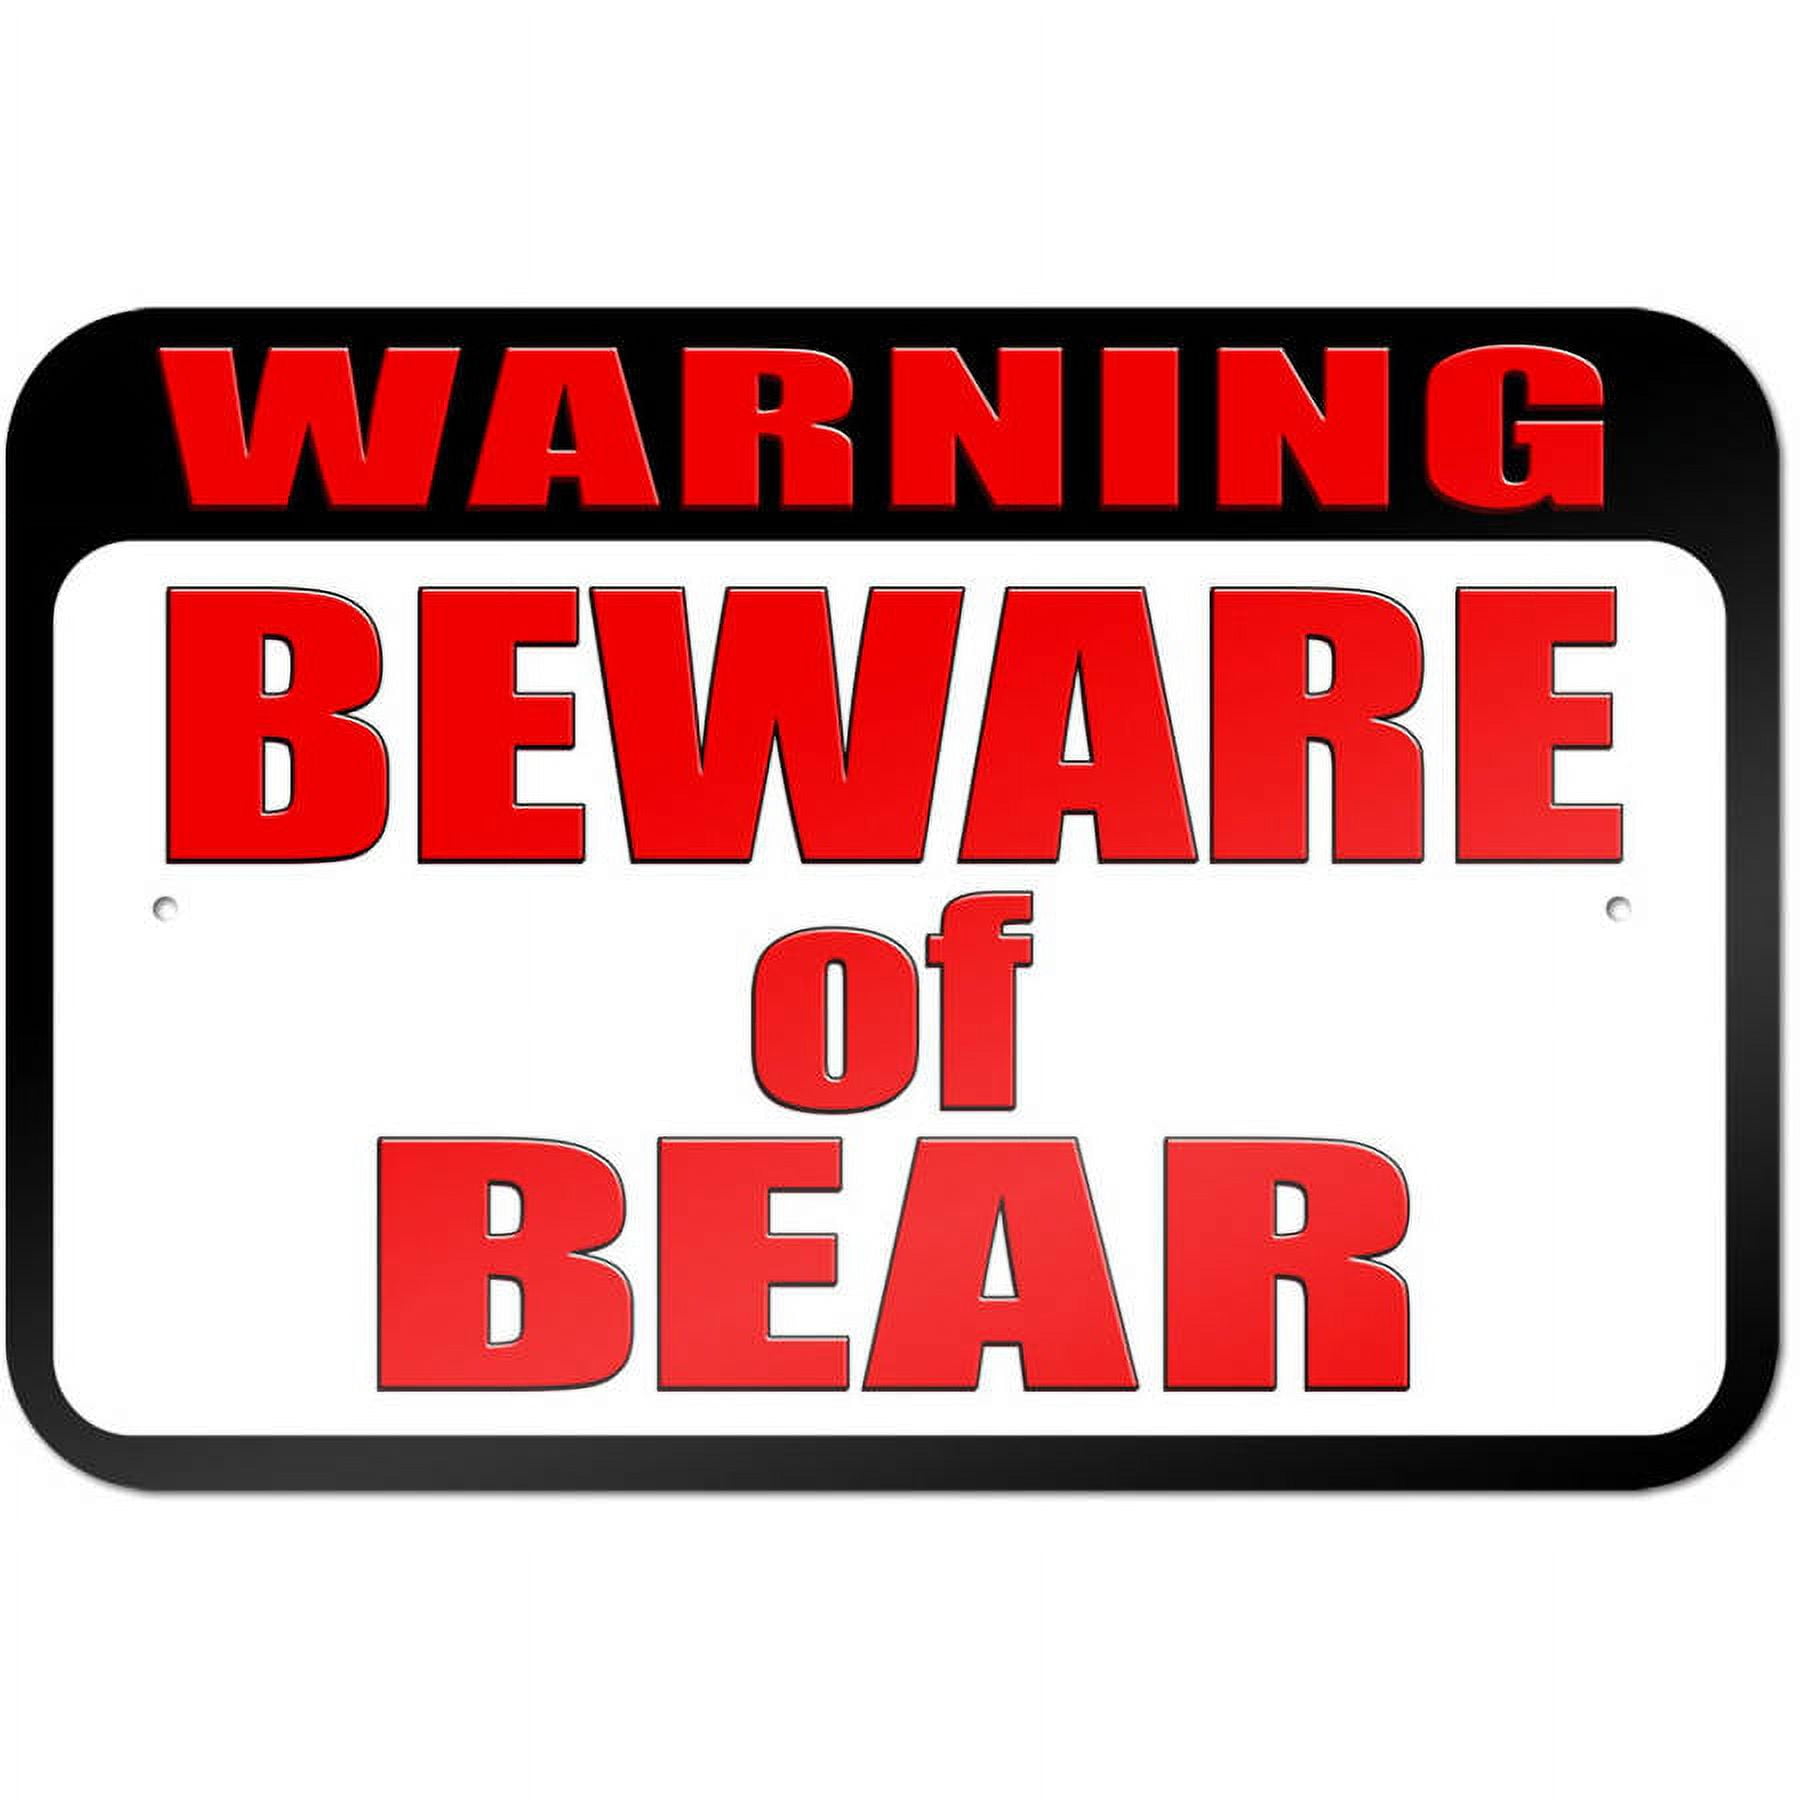 Grizzly Bear Warning Sign